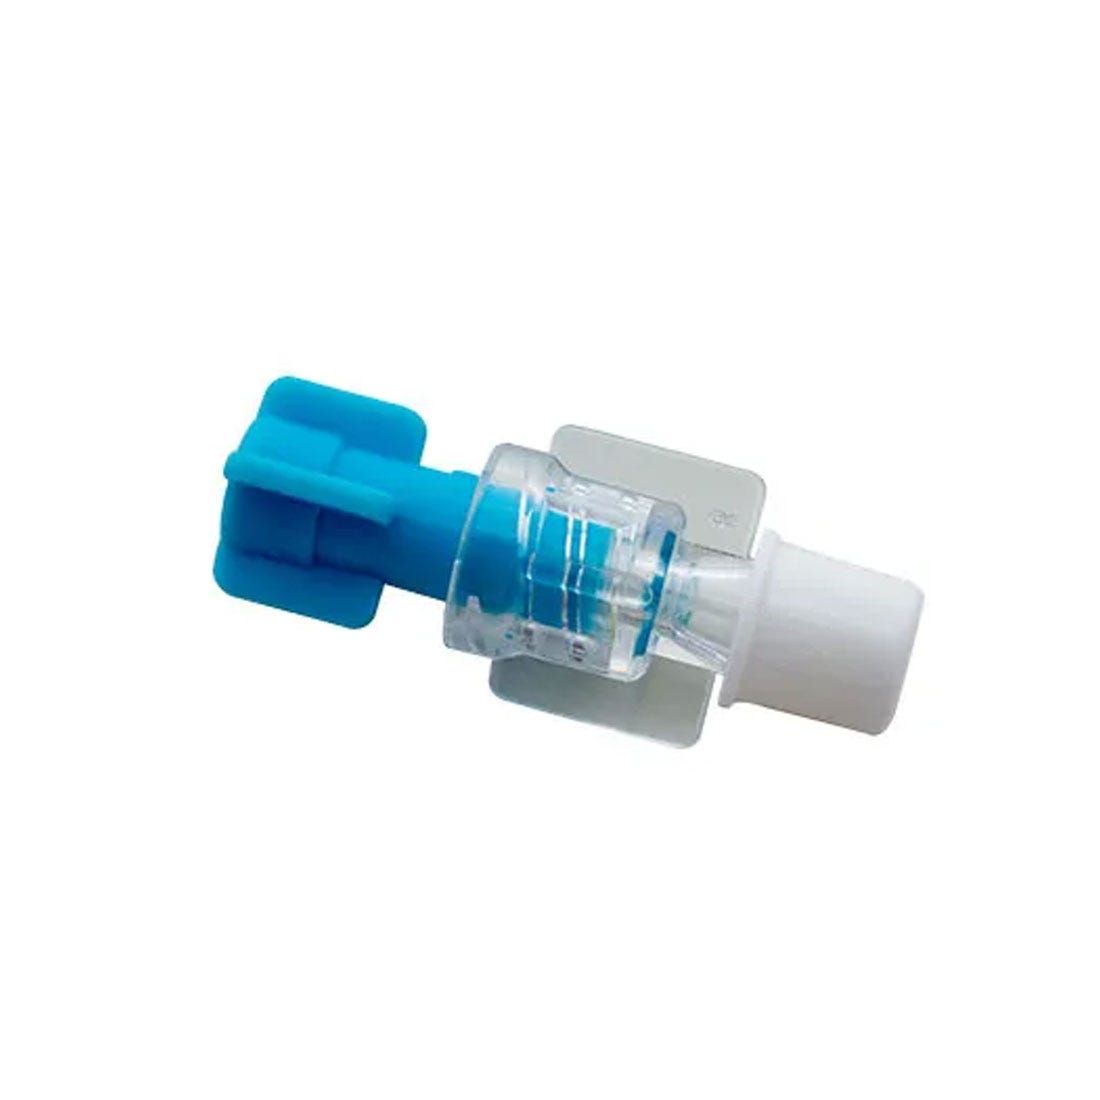 Injection Plug with Cap, Luer Lock, - 50/Box